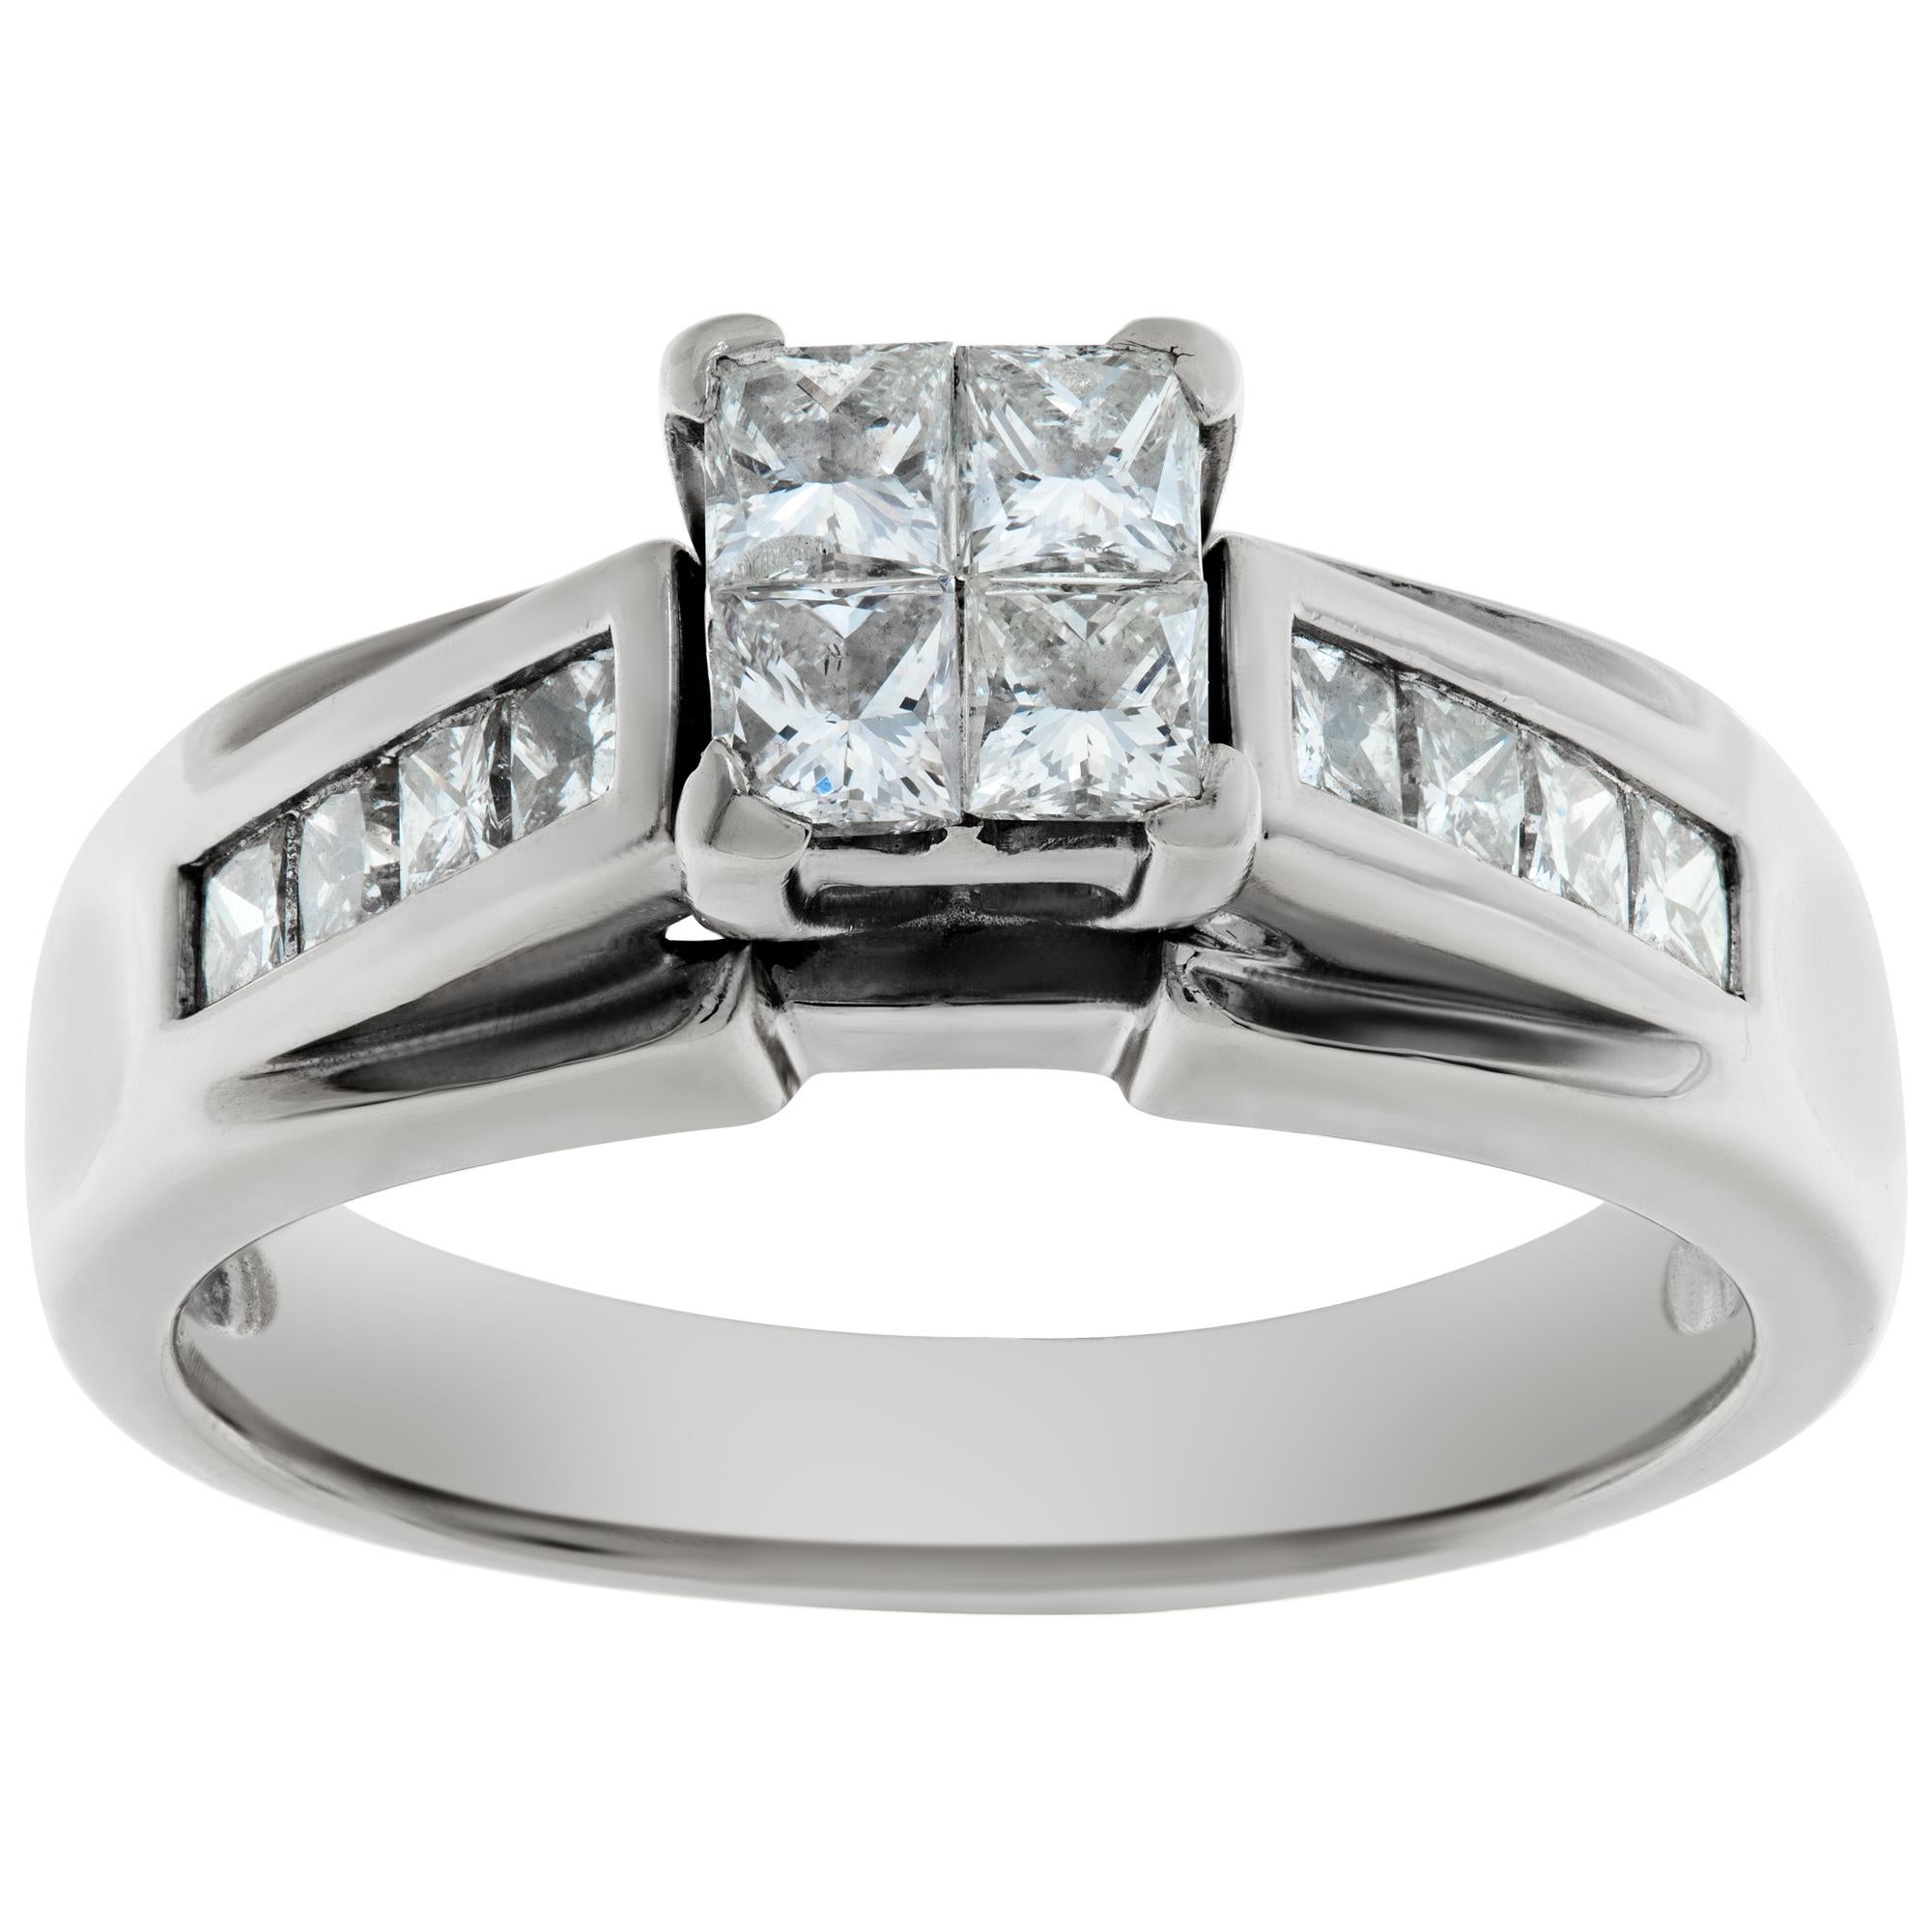 Illusion brilliant princess cut diamond ring set in 14k white gold. Princess cut diamonds approx. weight: 1.00 carat. Estimate: H-I color. VS-SI clarity. Size 8.This Diamond ring is currently size 8 and some items can be sized up or down, please